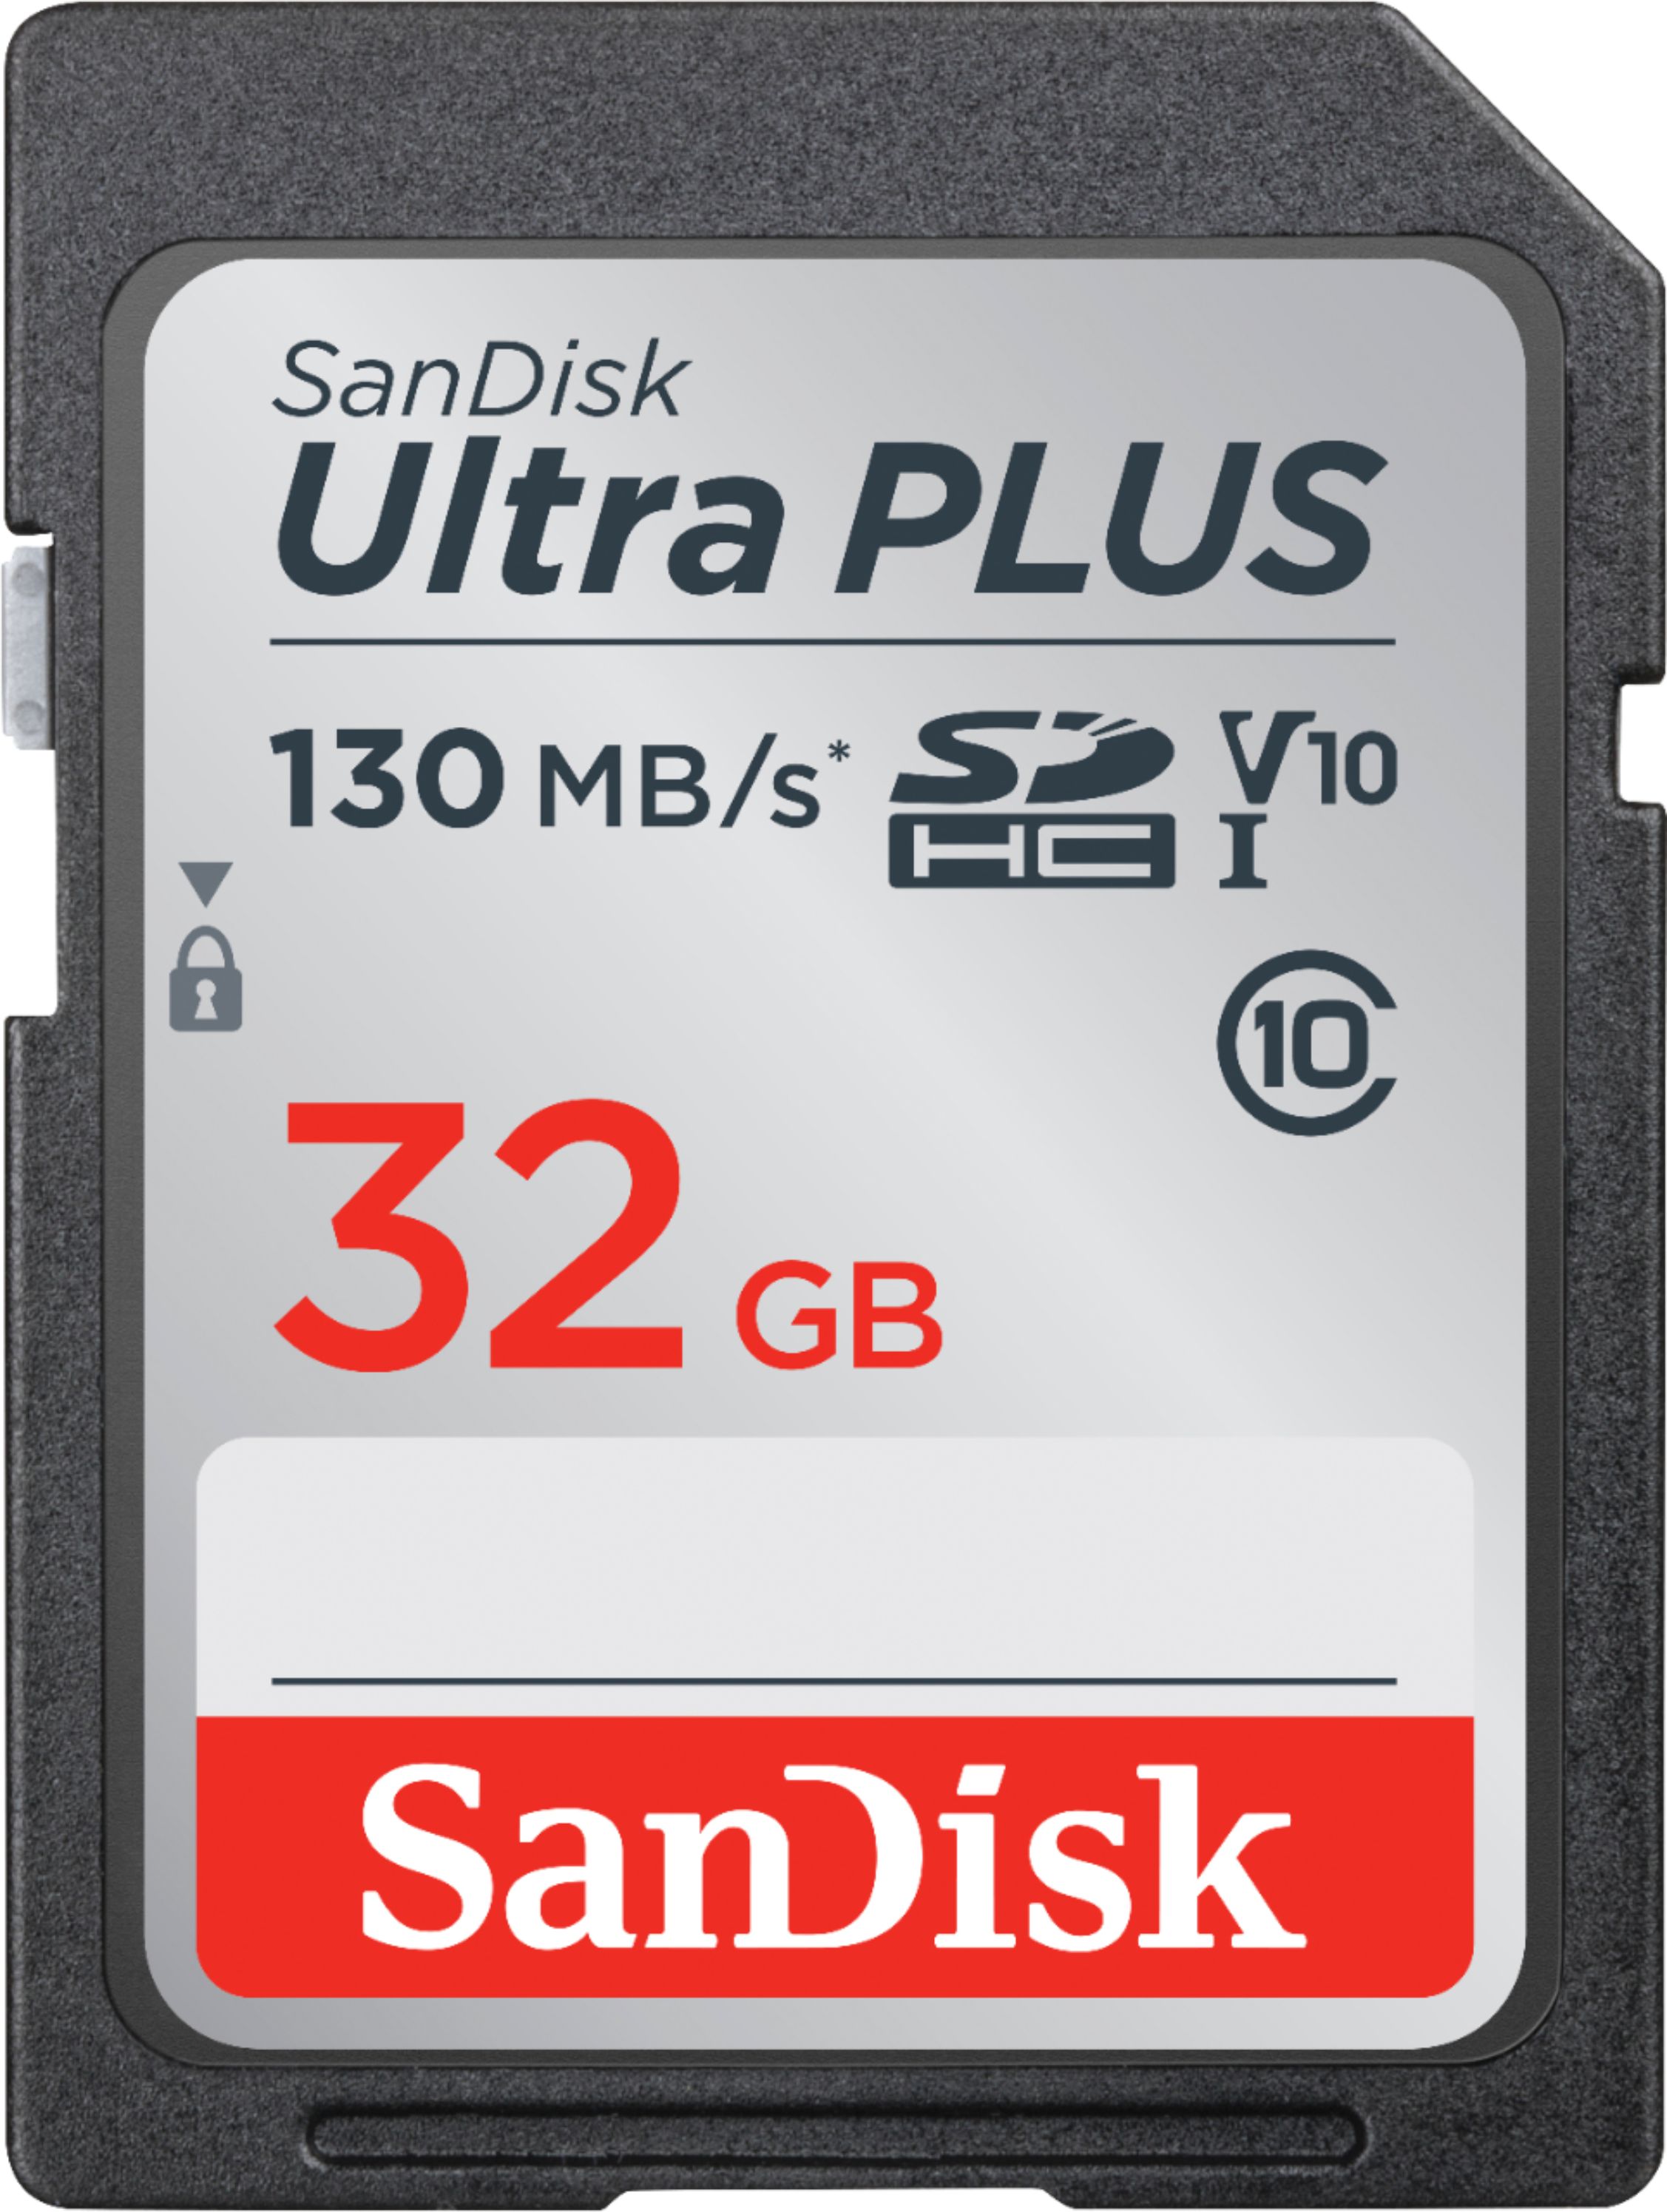 Sandisk Ultra Plus 32gb Sdhc Uhs I Memory Card Sdsduw3 032g An6in Best Buy